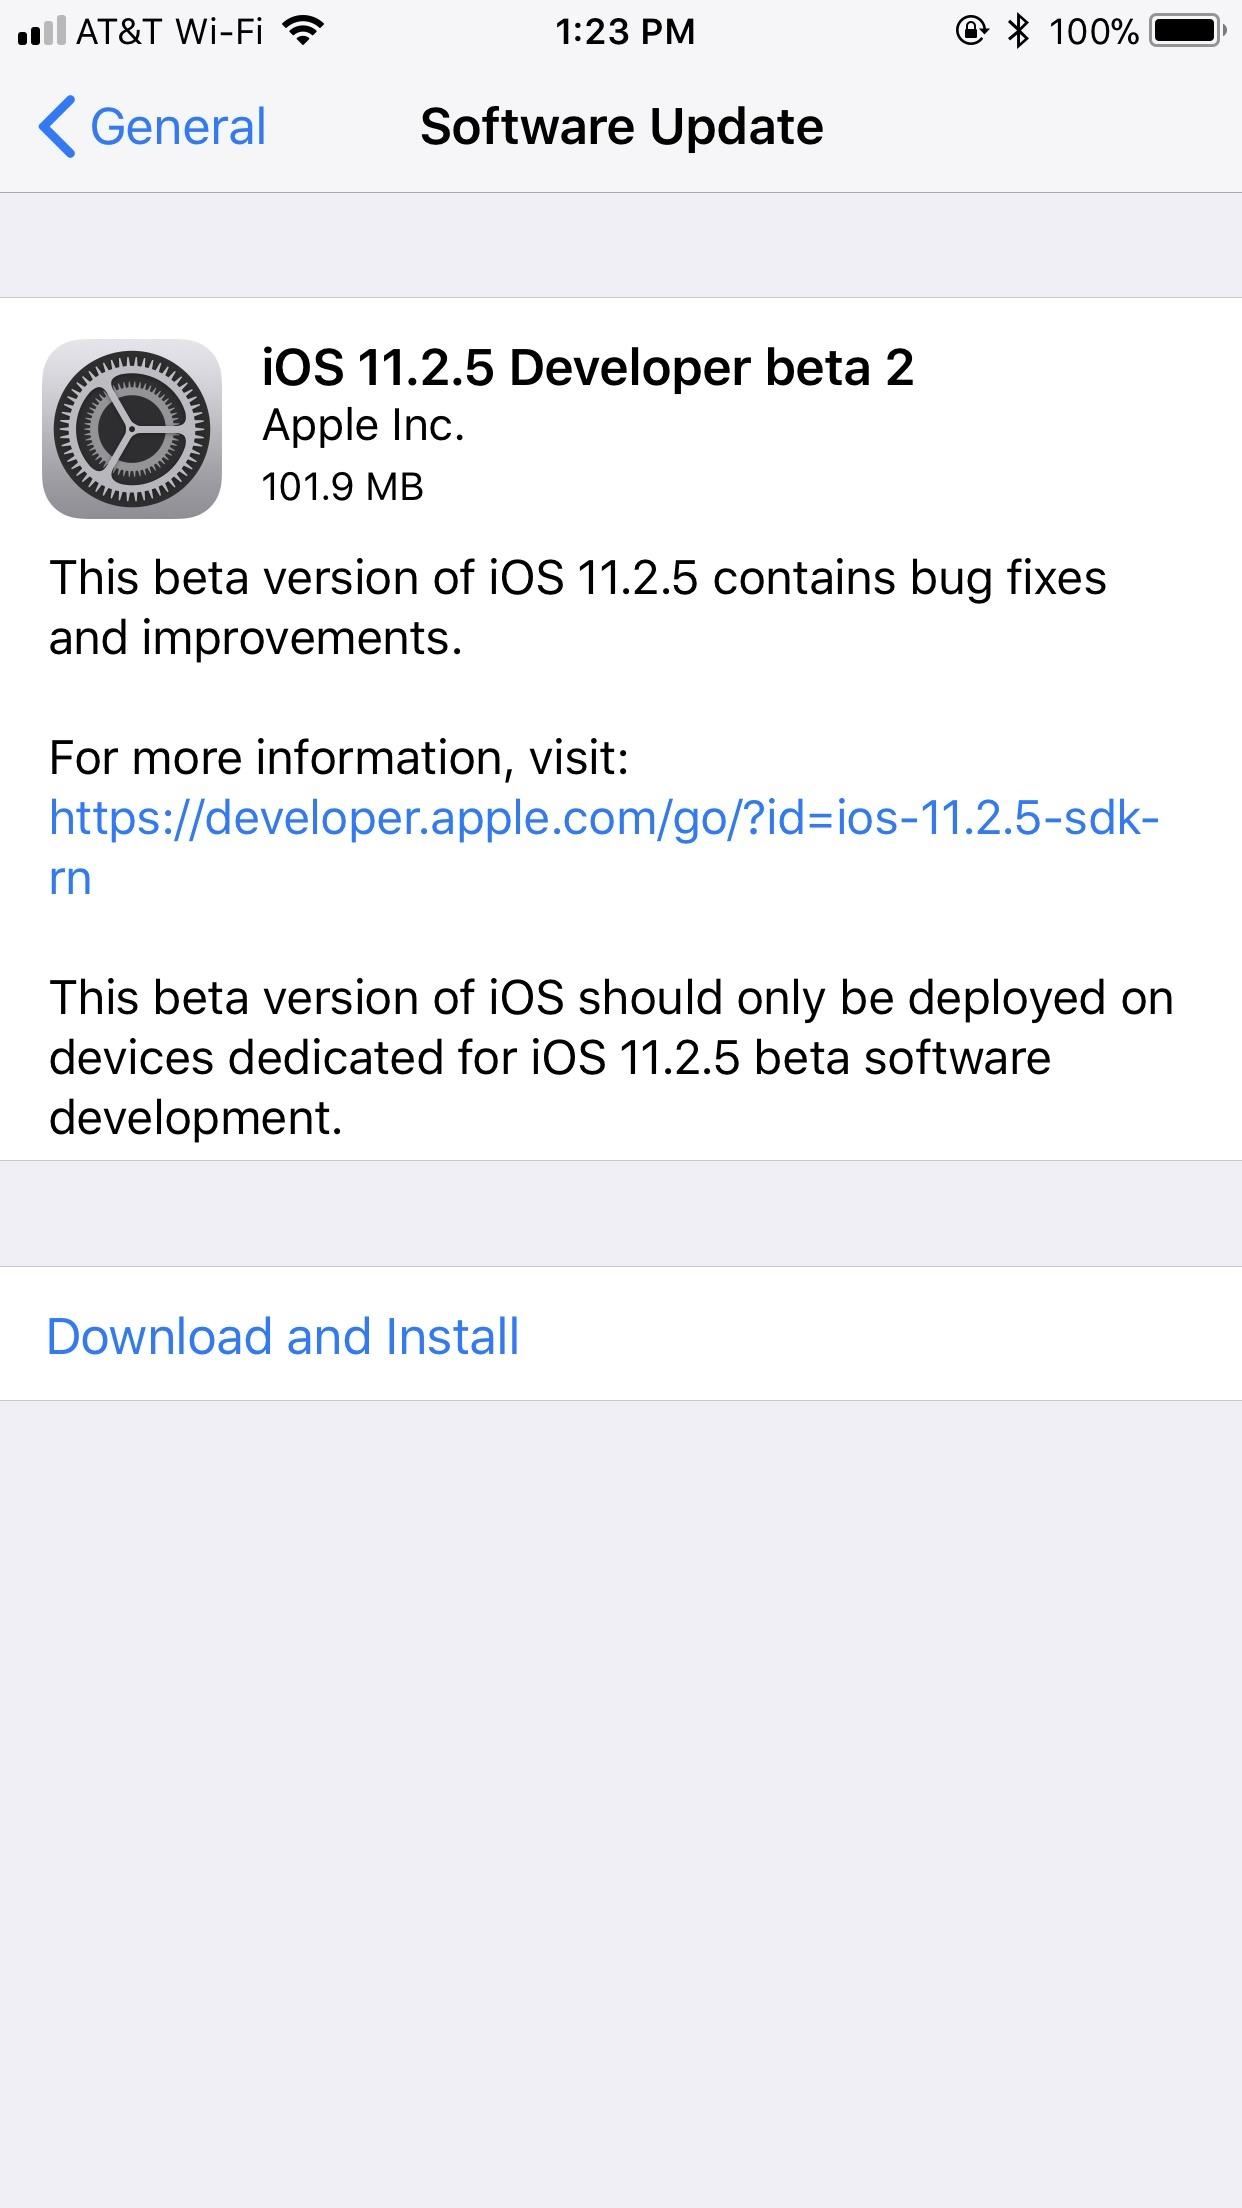 iOS 11.2.5 Beta 2 Released with Bug Fixes & Improvements